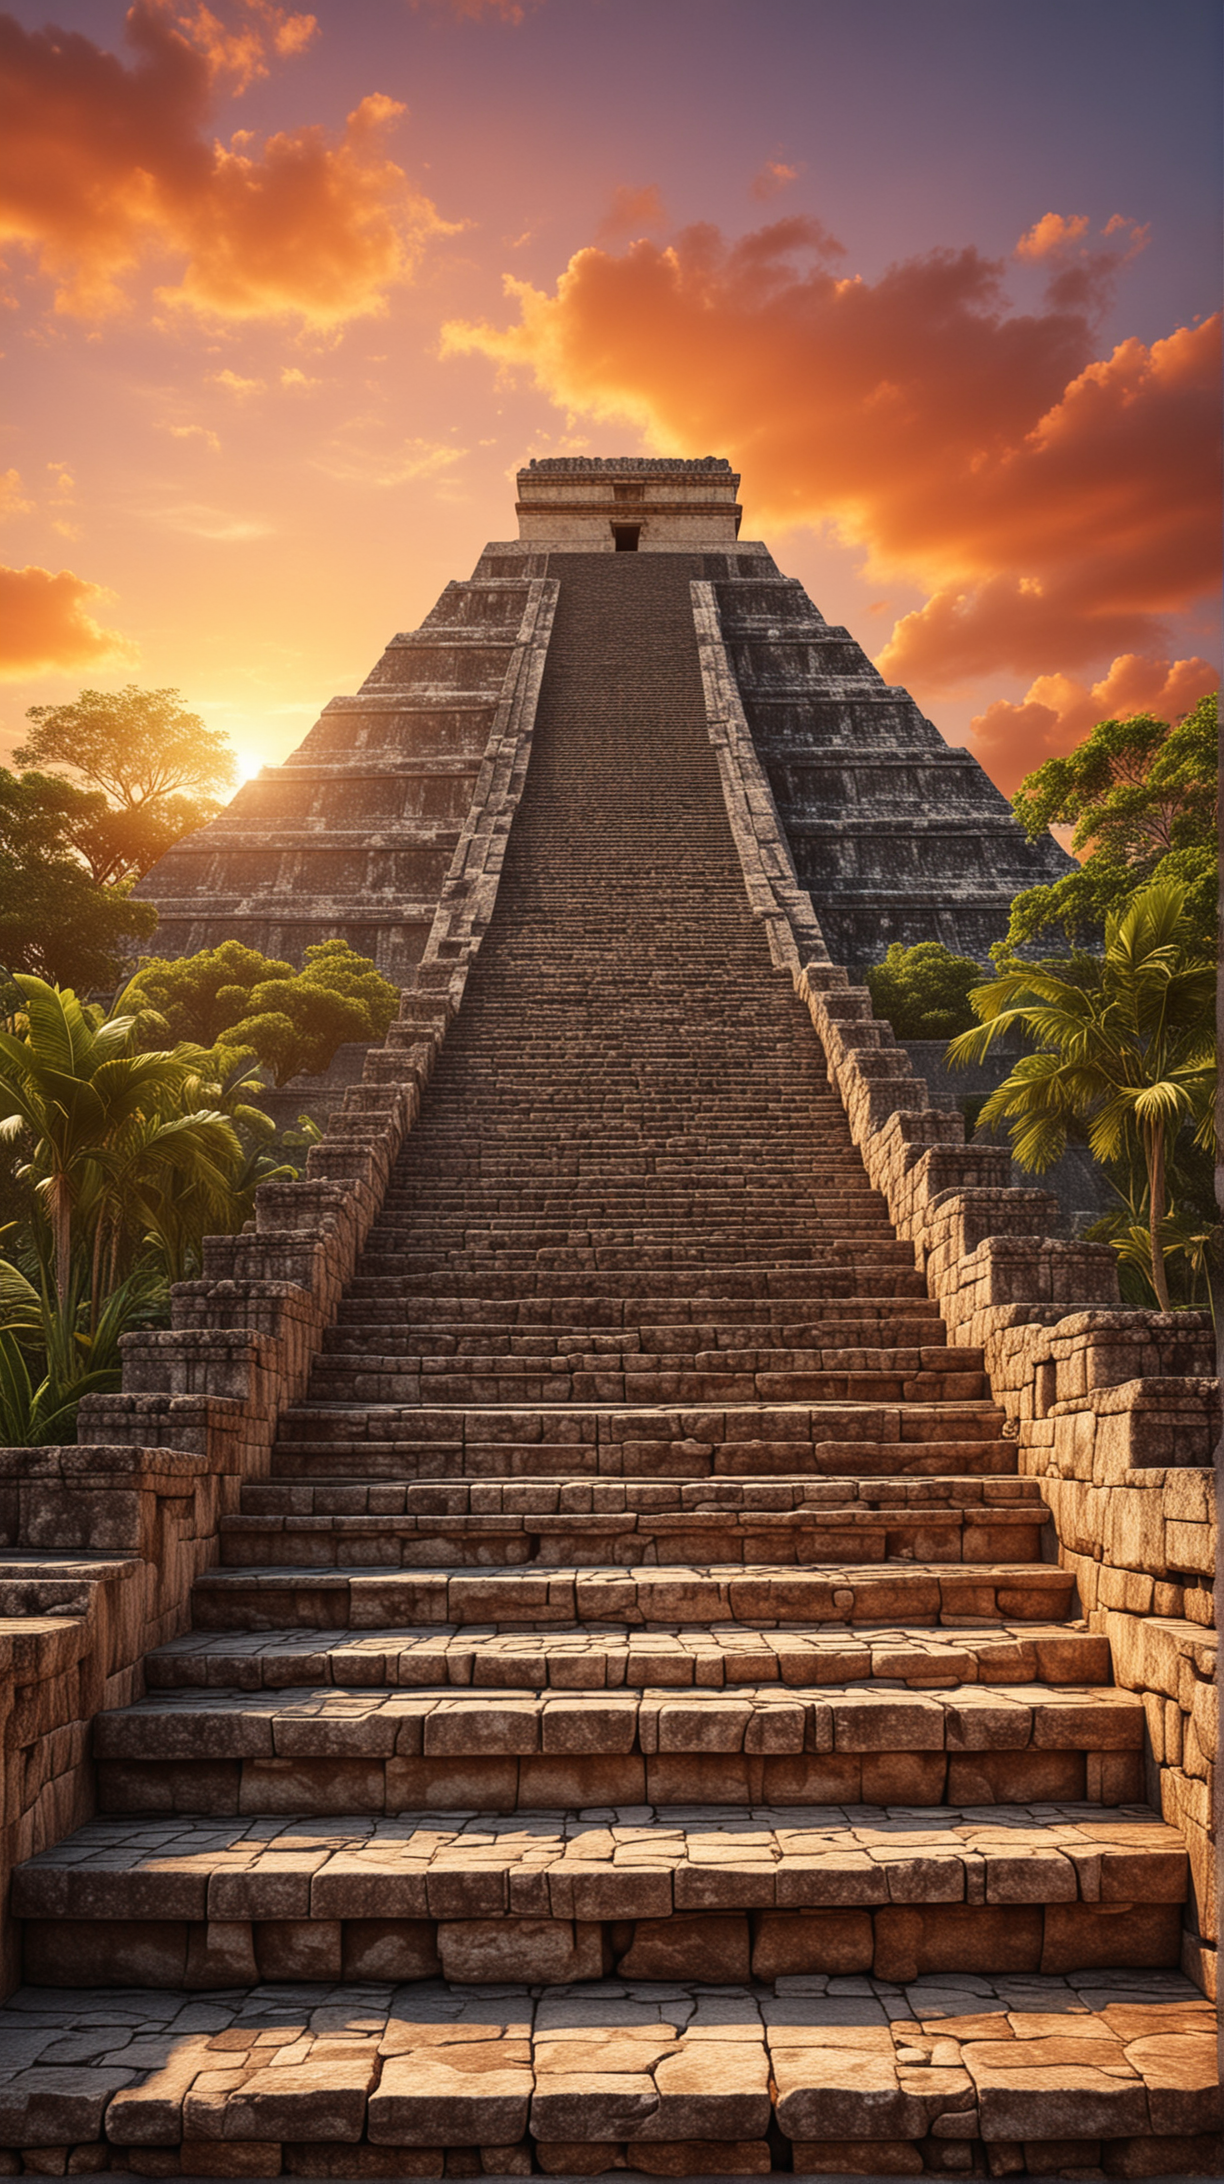 An ancient Maya pyramid rising majestically against the backdrop of a vibrant sunset, its stone steps illuminated by the last rays of daylight. hyper realistic